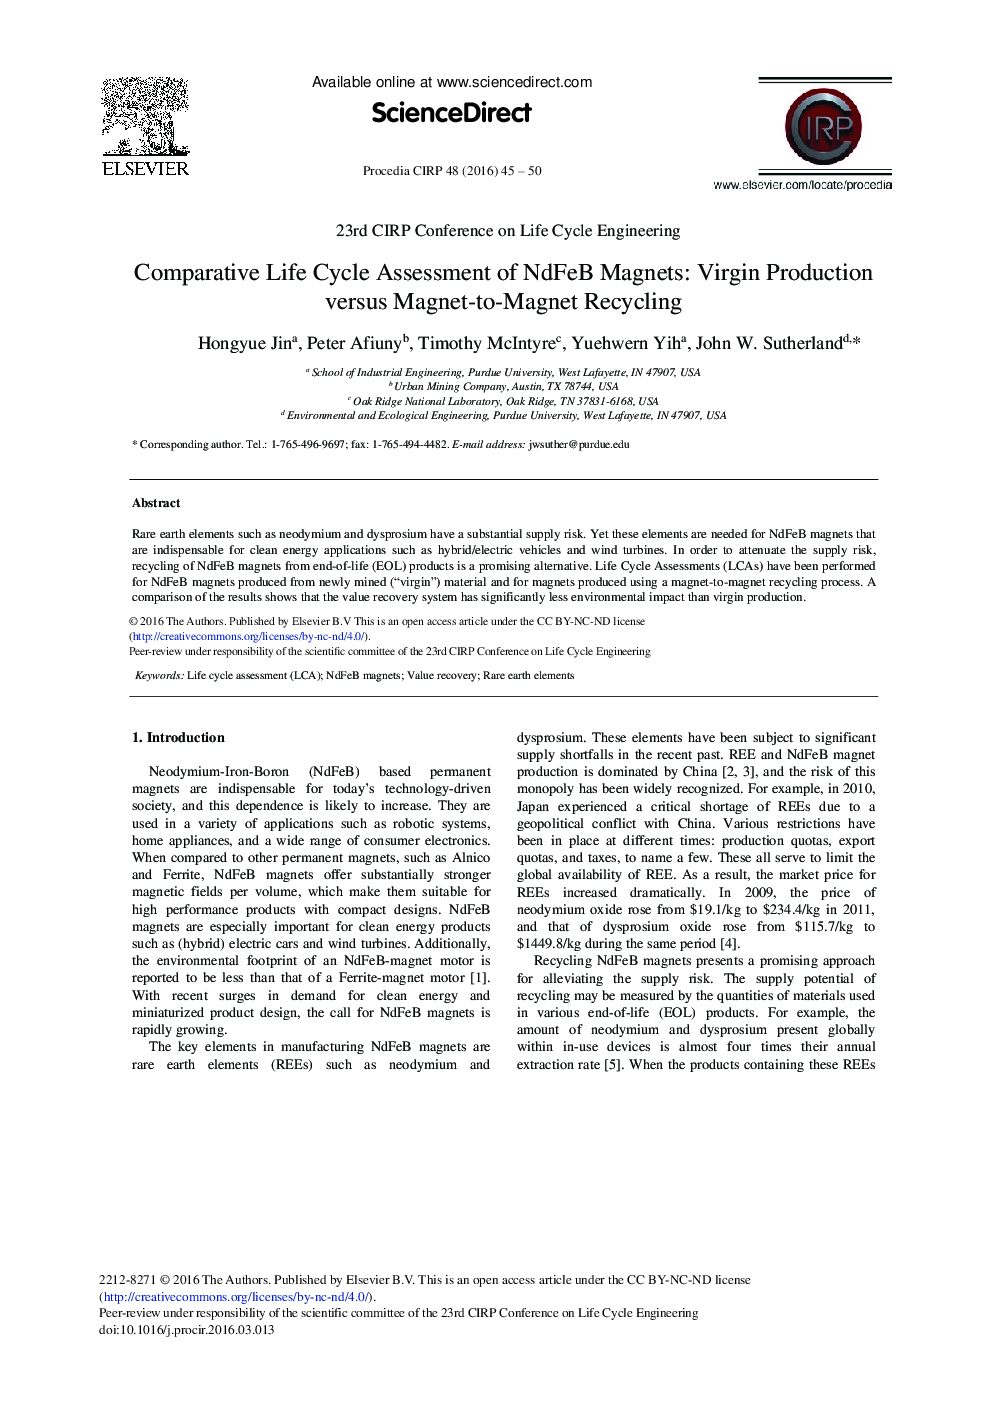 Comparative Life Cycle Assessment of NdFeB Magnets: Virgin Production versus Magnet-to-Magnet Recycling 